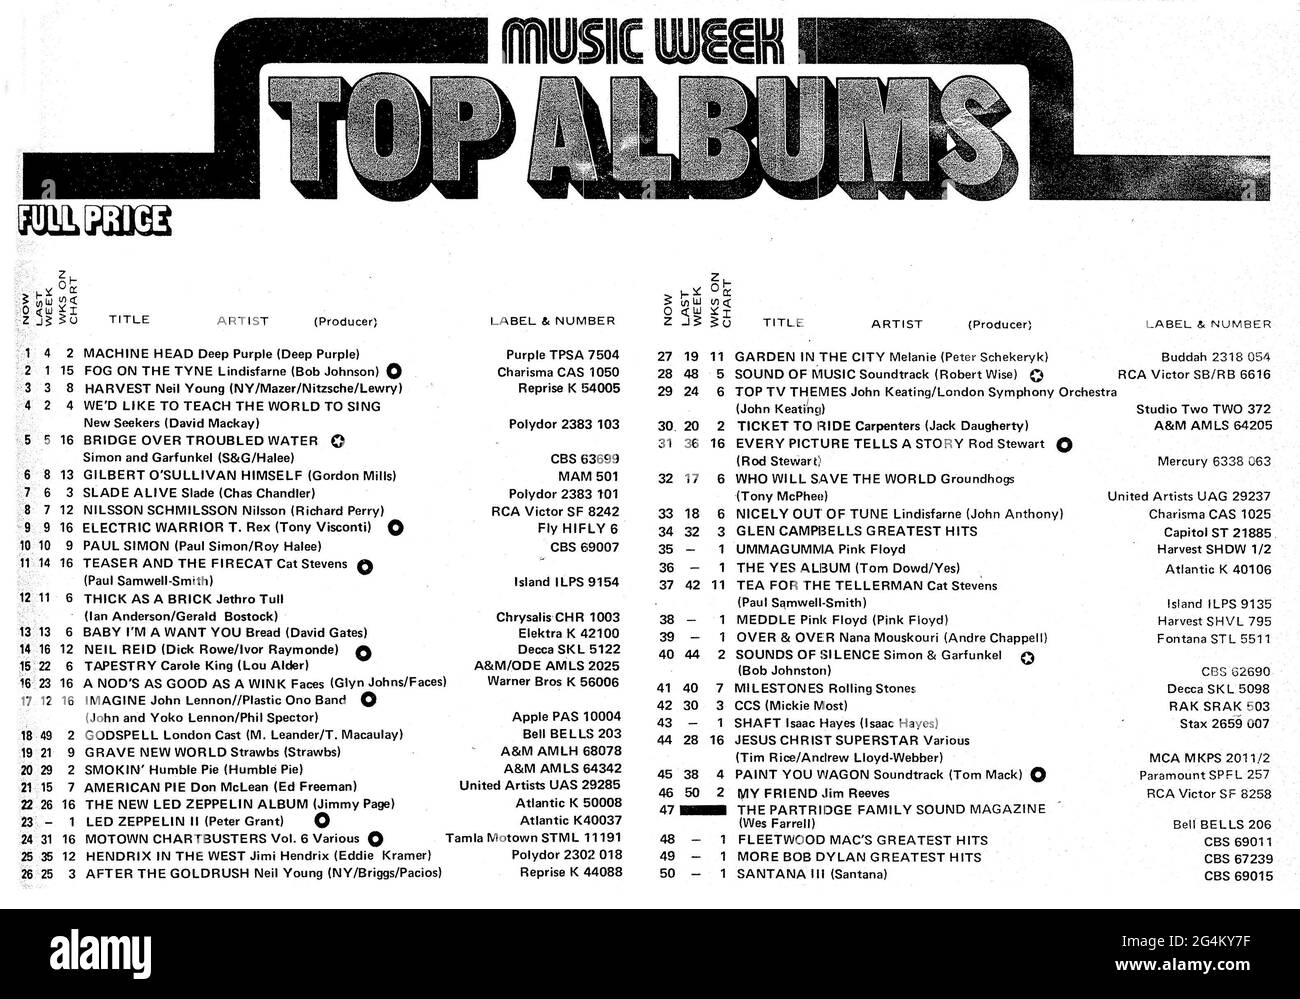 Top Fifty album chart UK April 22. 1972 with big bands like Deep Purple,  Led Zeppelin, Jethro Tull, Neil Young, Jimi Hendrix. A great snapshot of  the British album chart at the